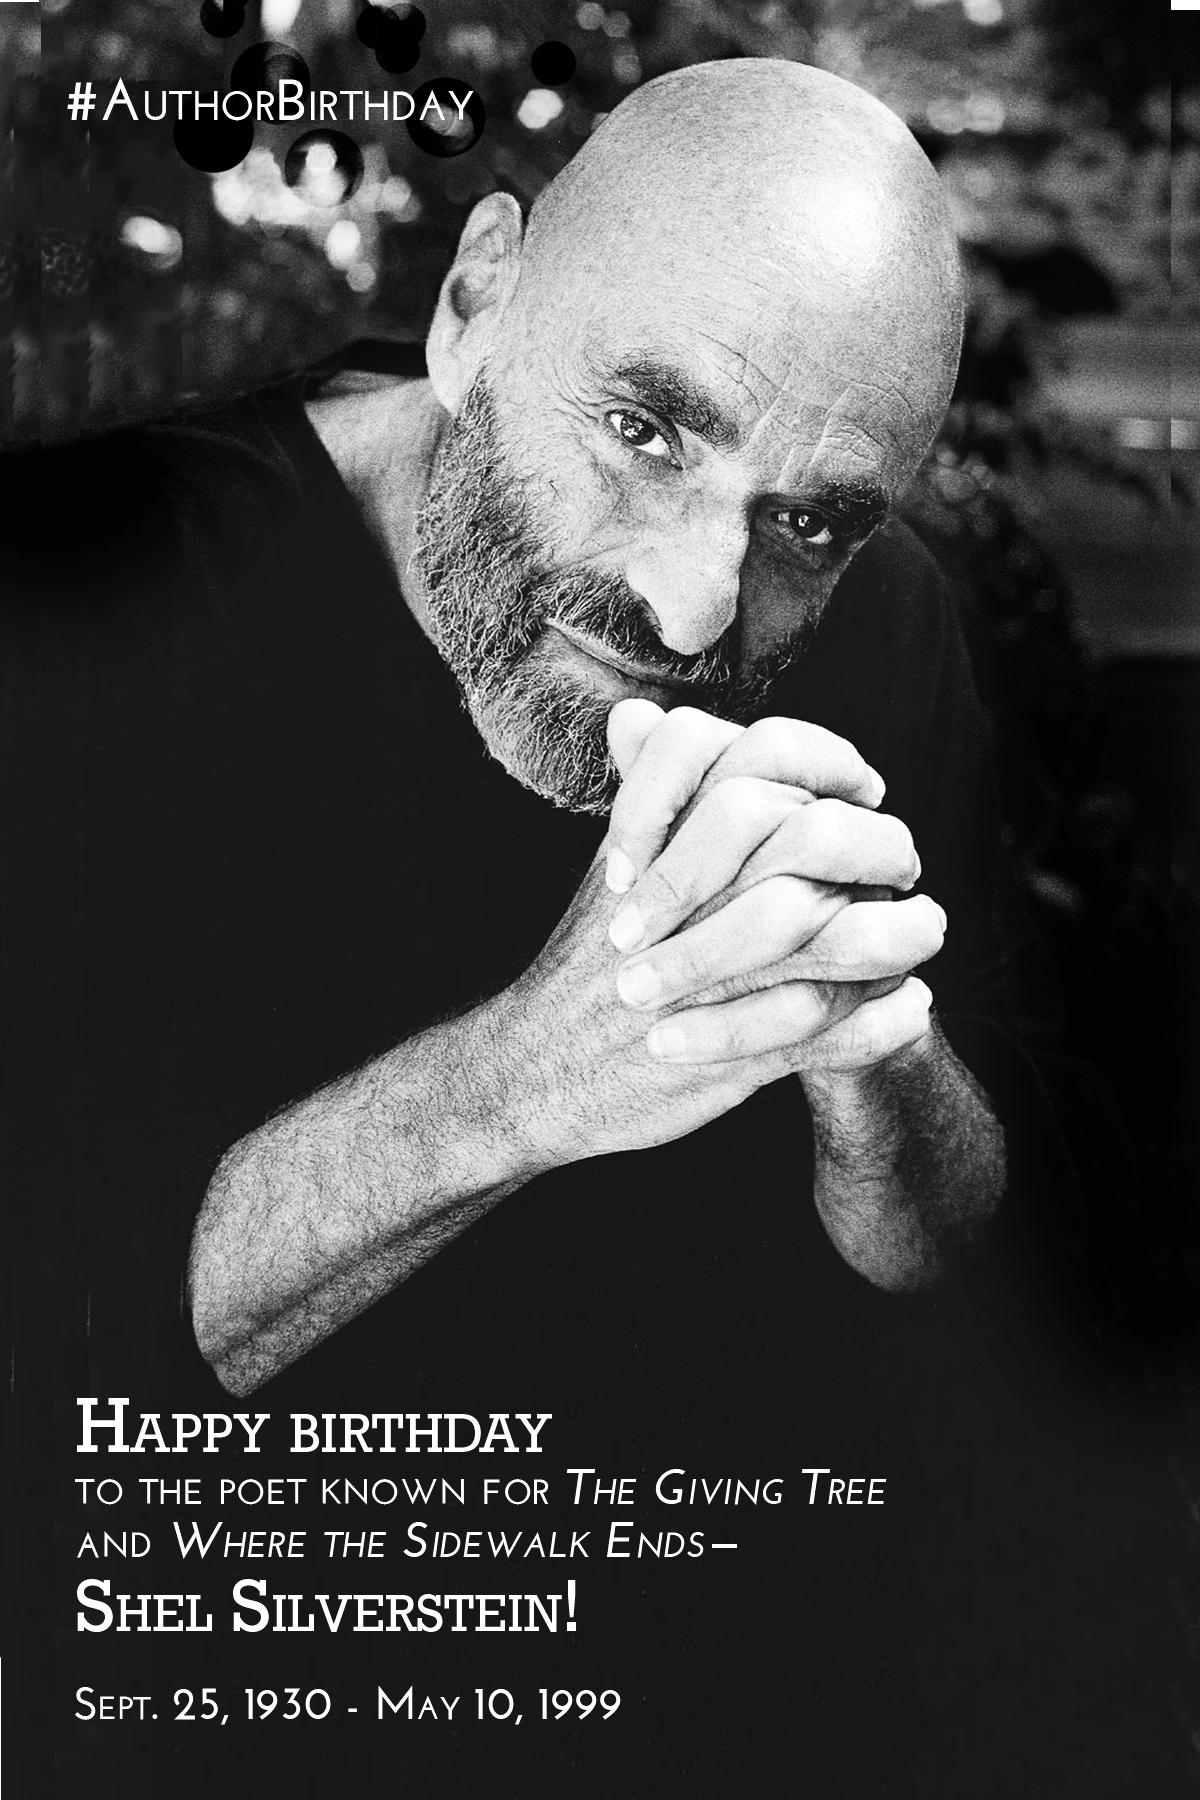 Happy birthday, Shel Silverstein! A poet known for The Giving Tree and Where the Sidewalk Ends.  